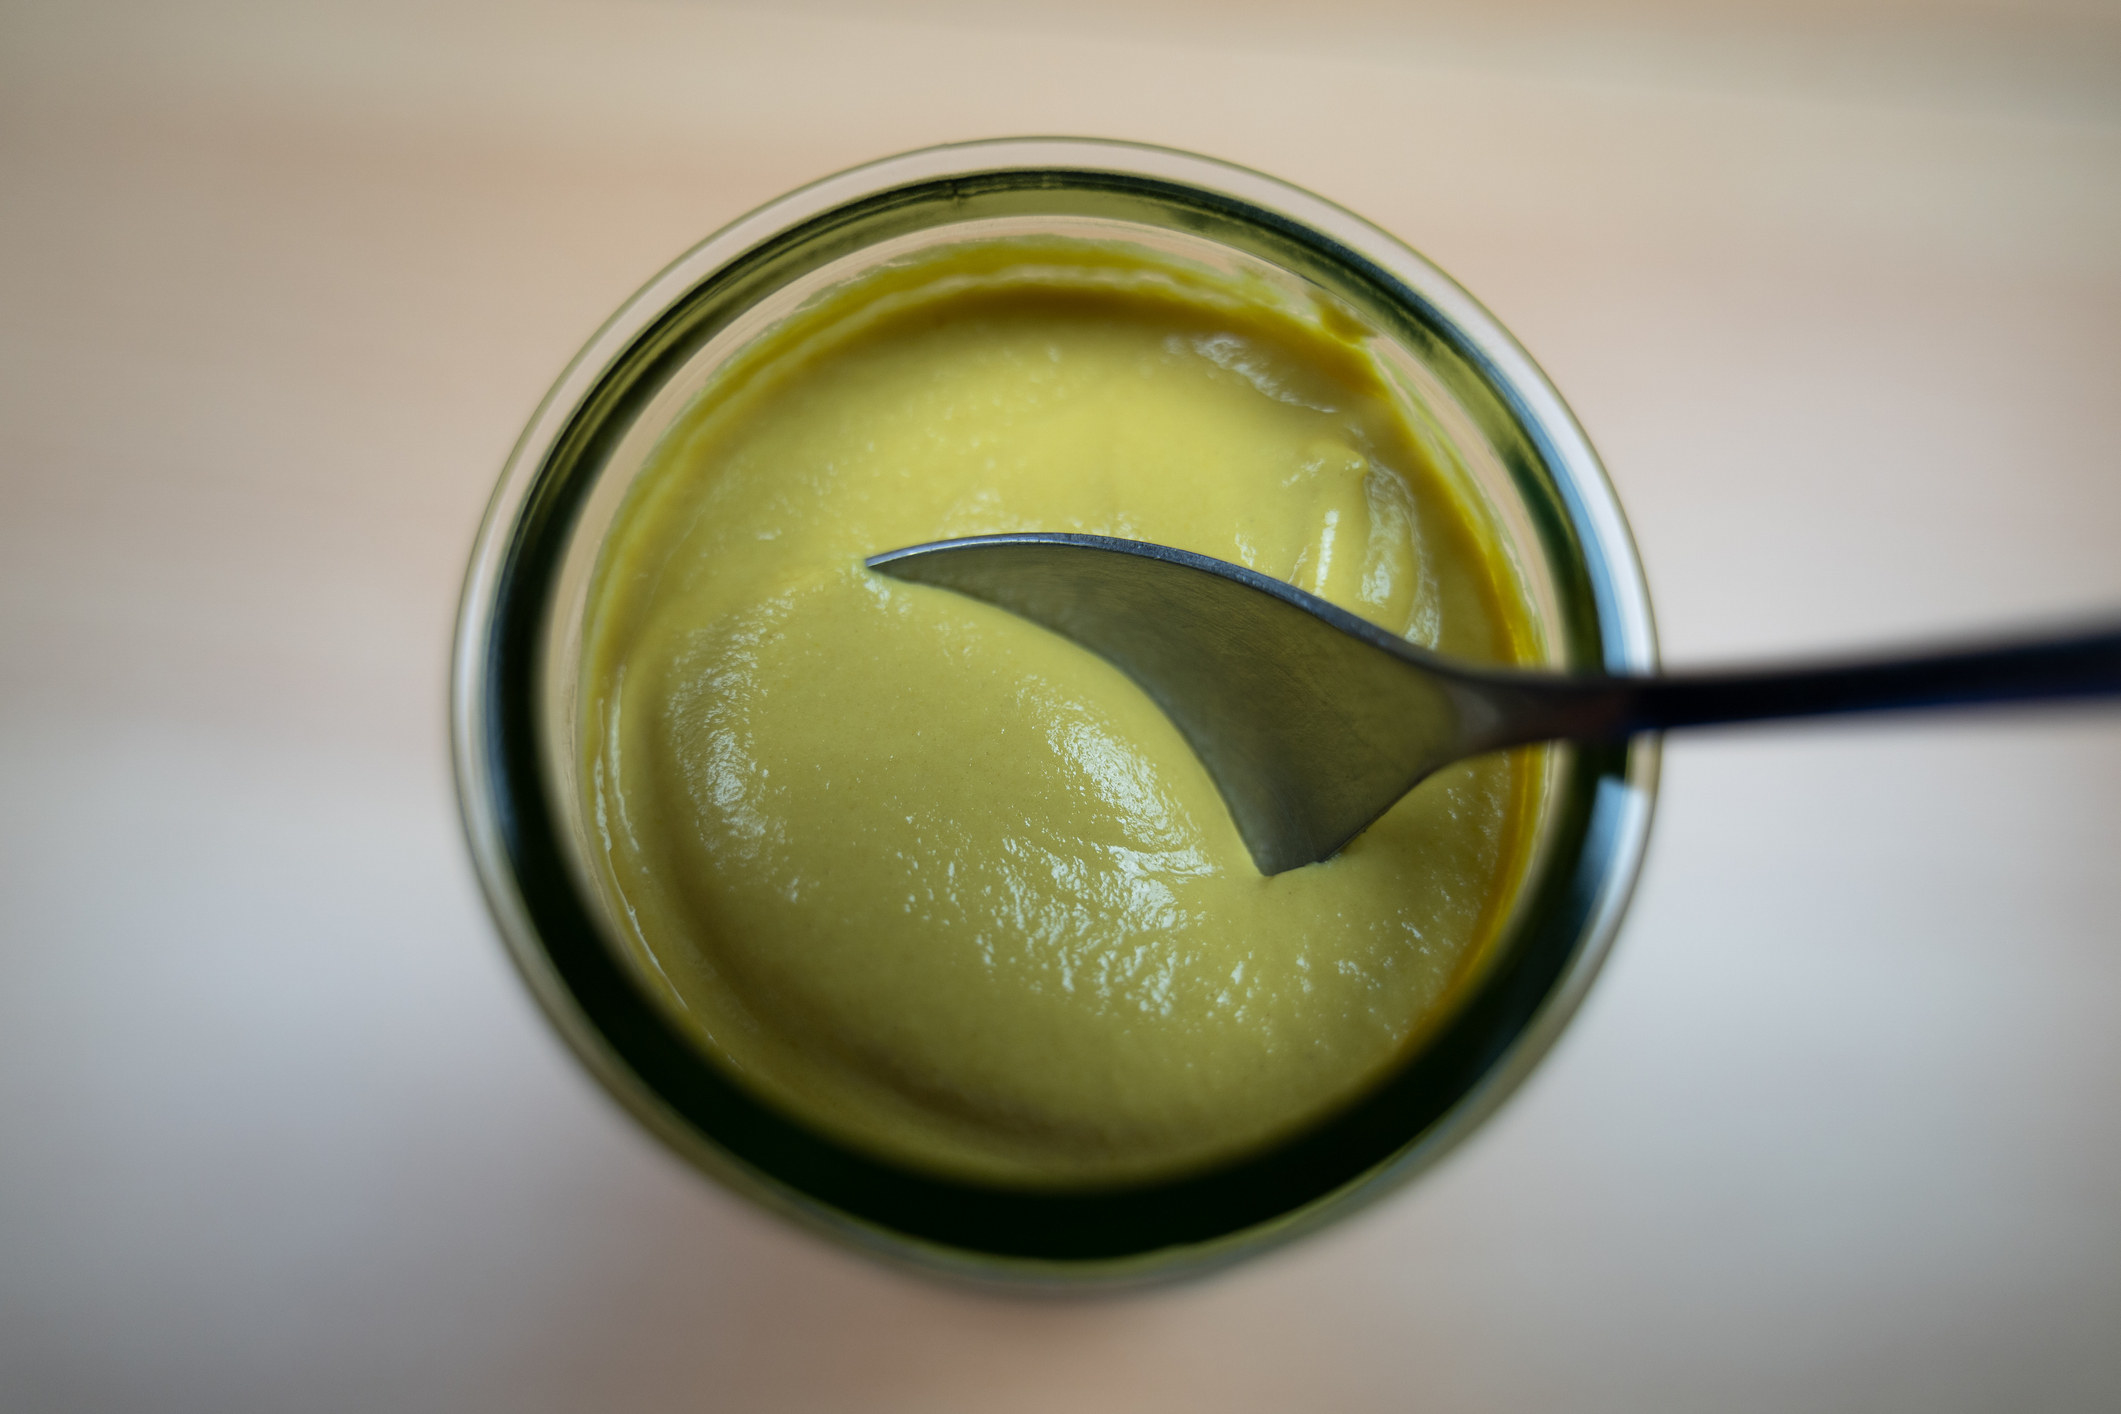 A spoonful of yellow mustard from the jar